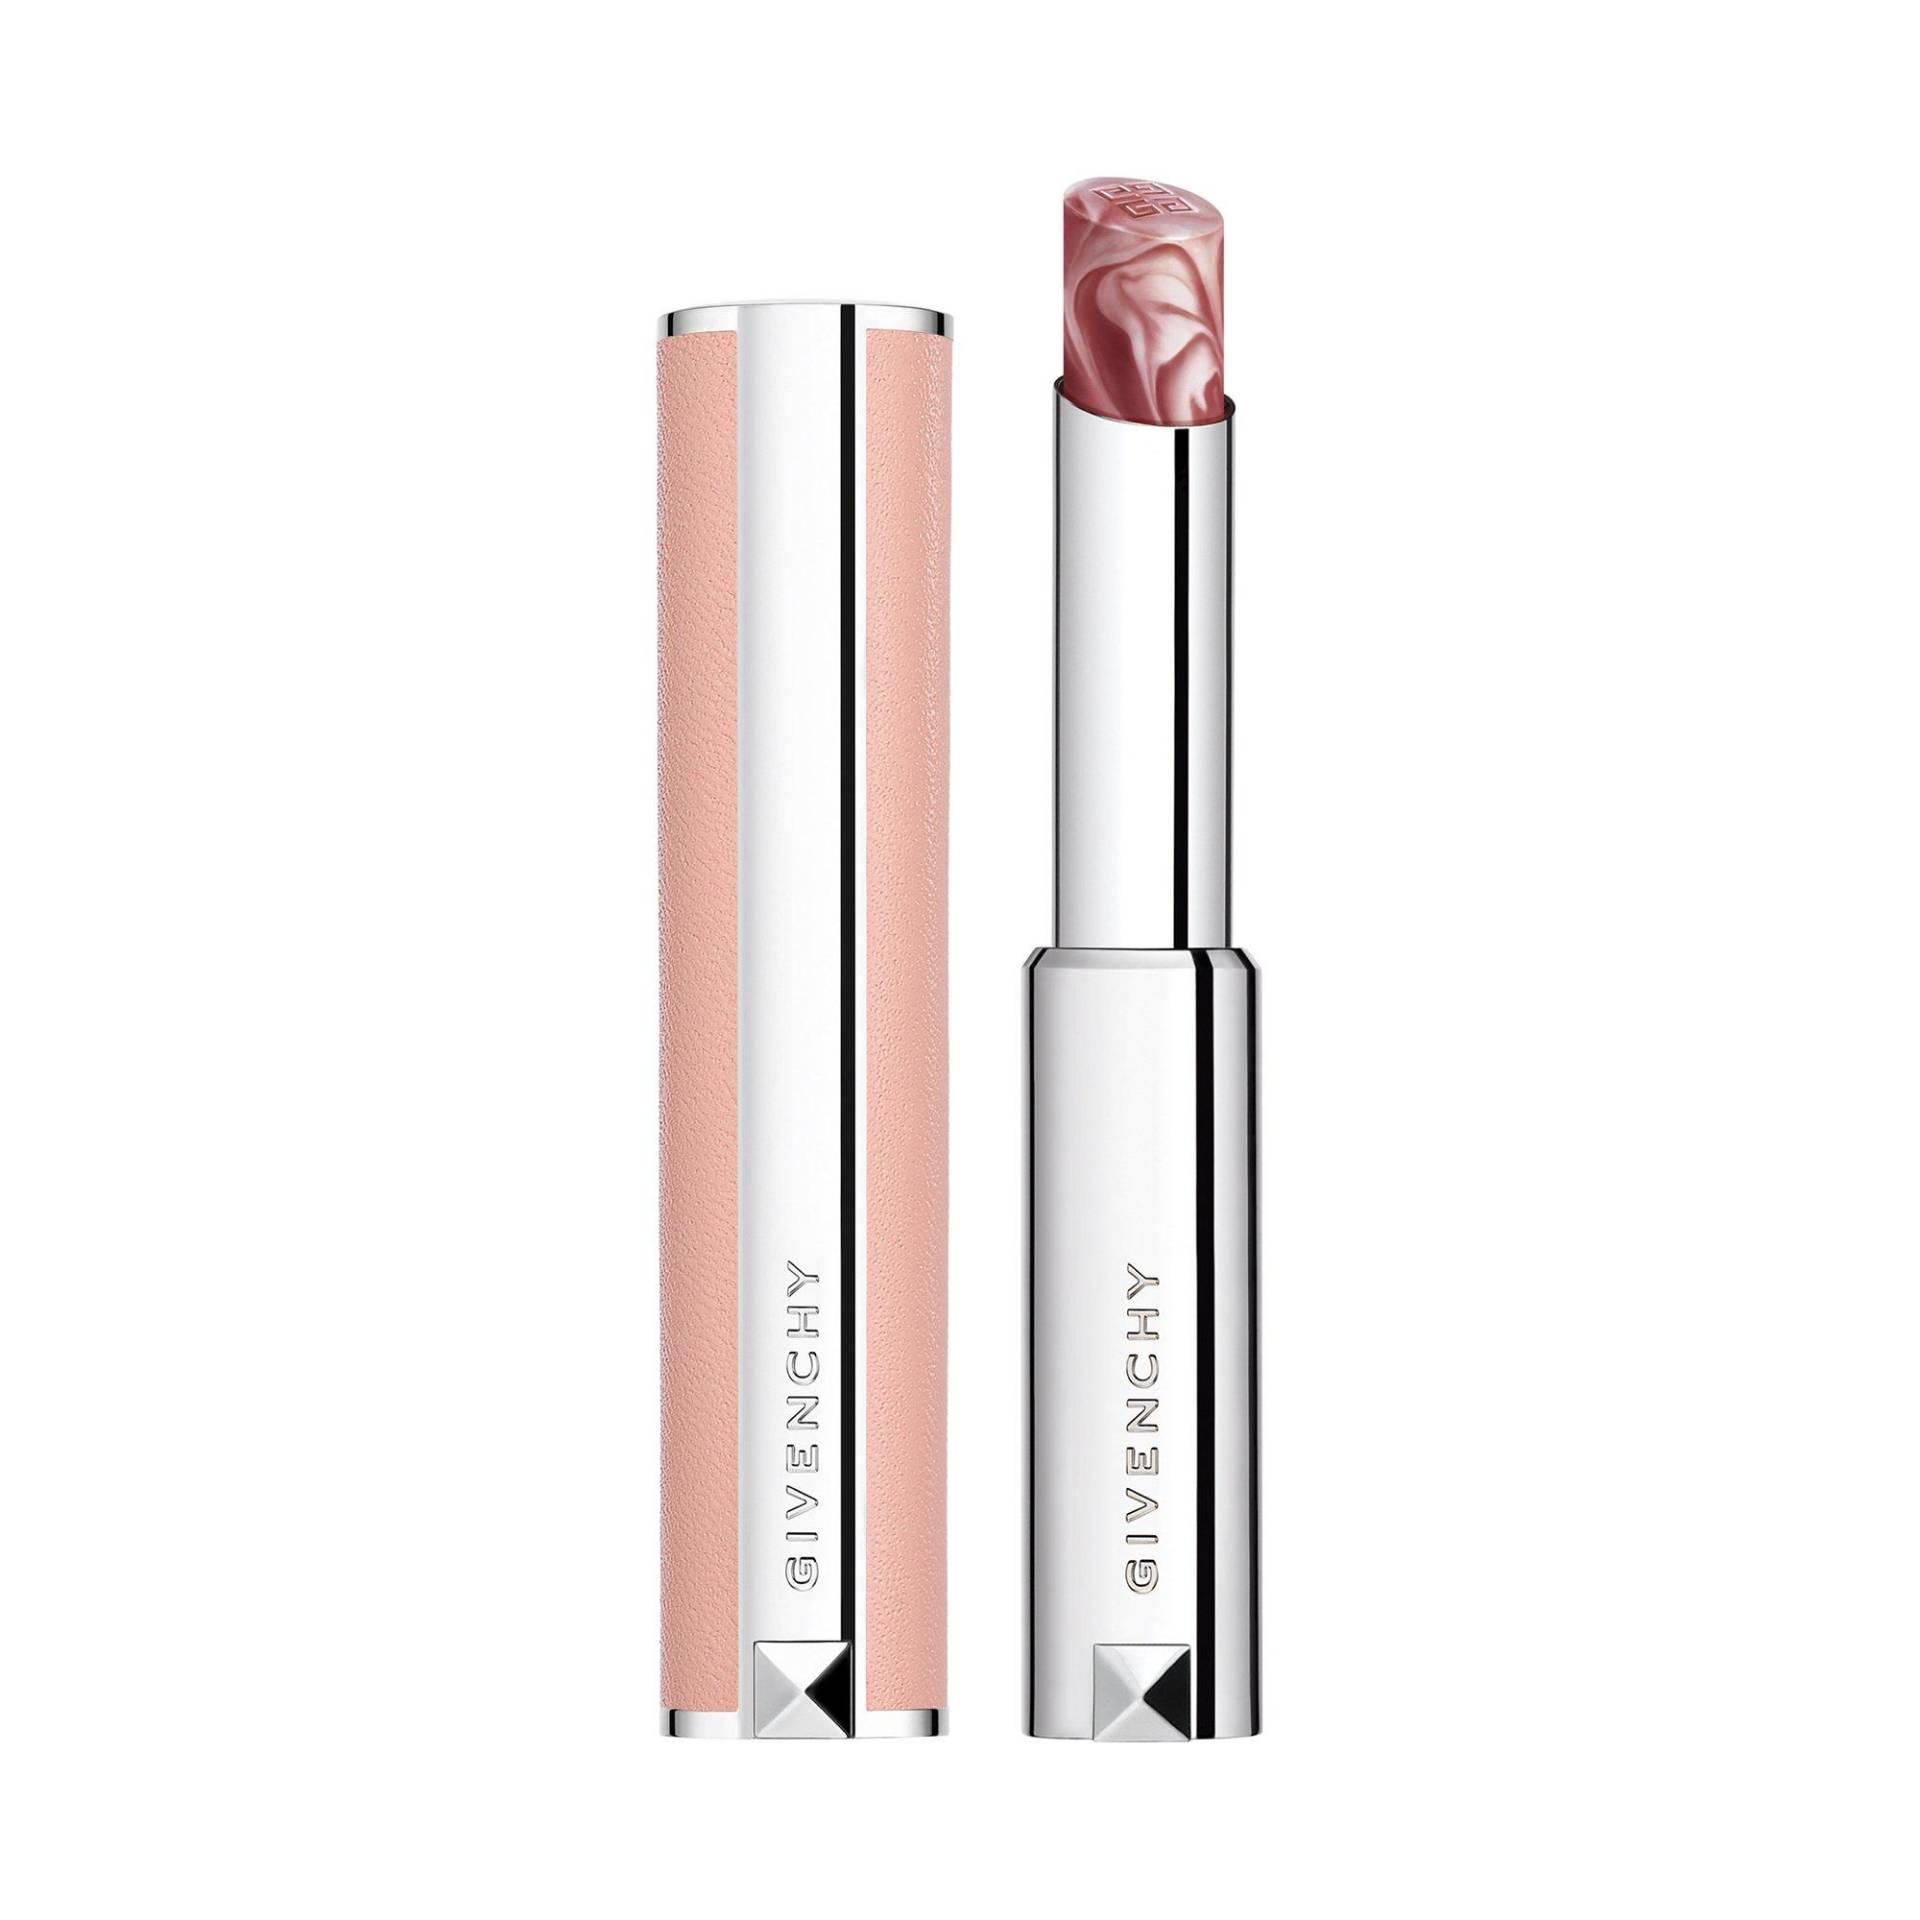 Rose Perfecto - Lipbalm Damen N - Chiling Brown von GIVENCHY